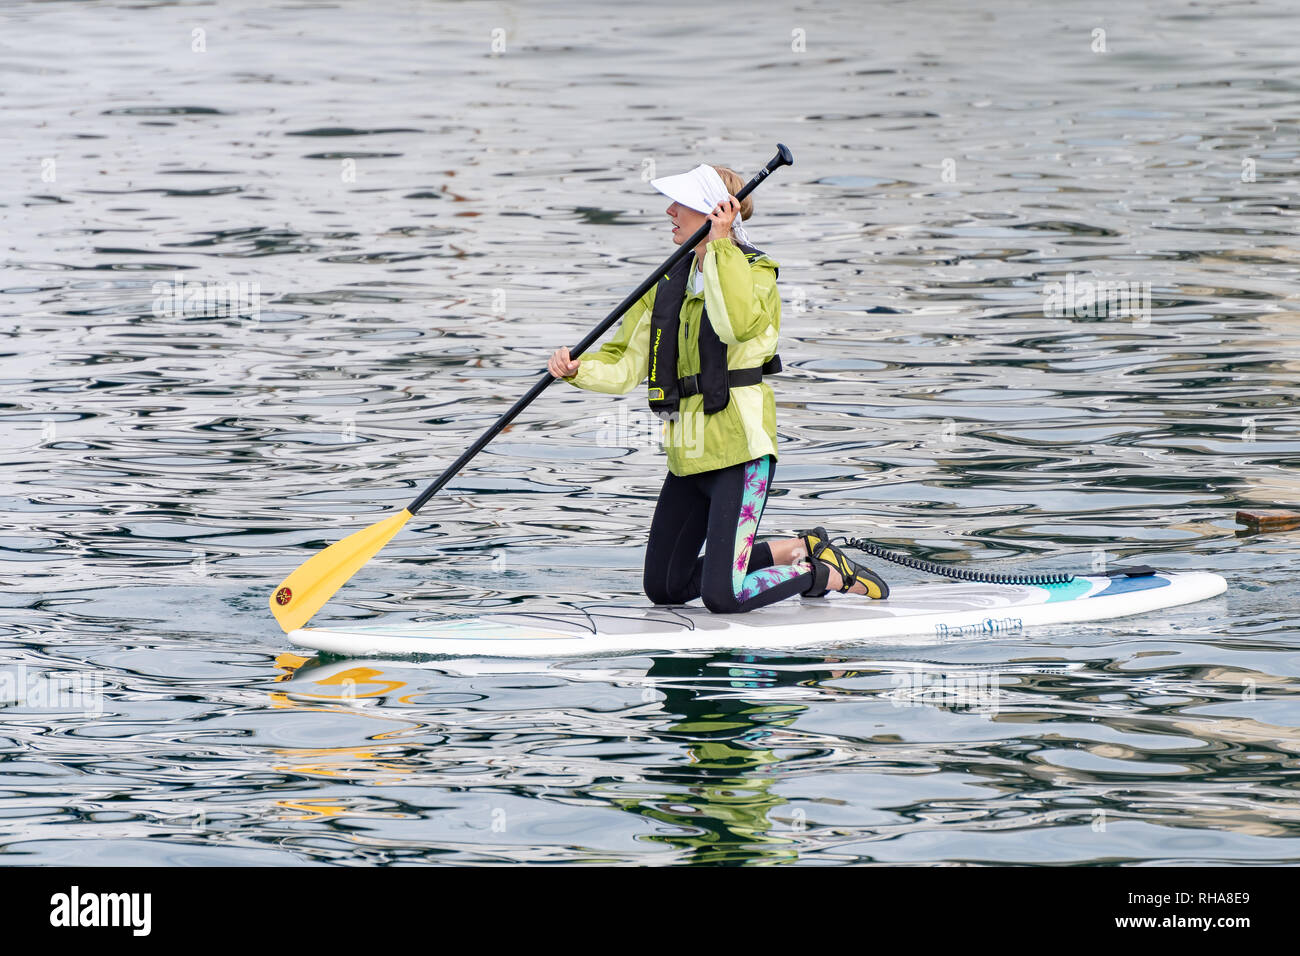 Vancouver, Canada - September 23 2017: Active caucasian adult female mid 30s kneeling on paddle board on river wearing green raincoat and visor hat Stock Photo